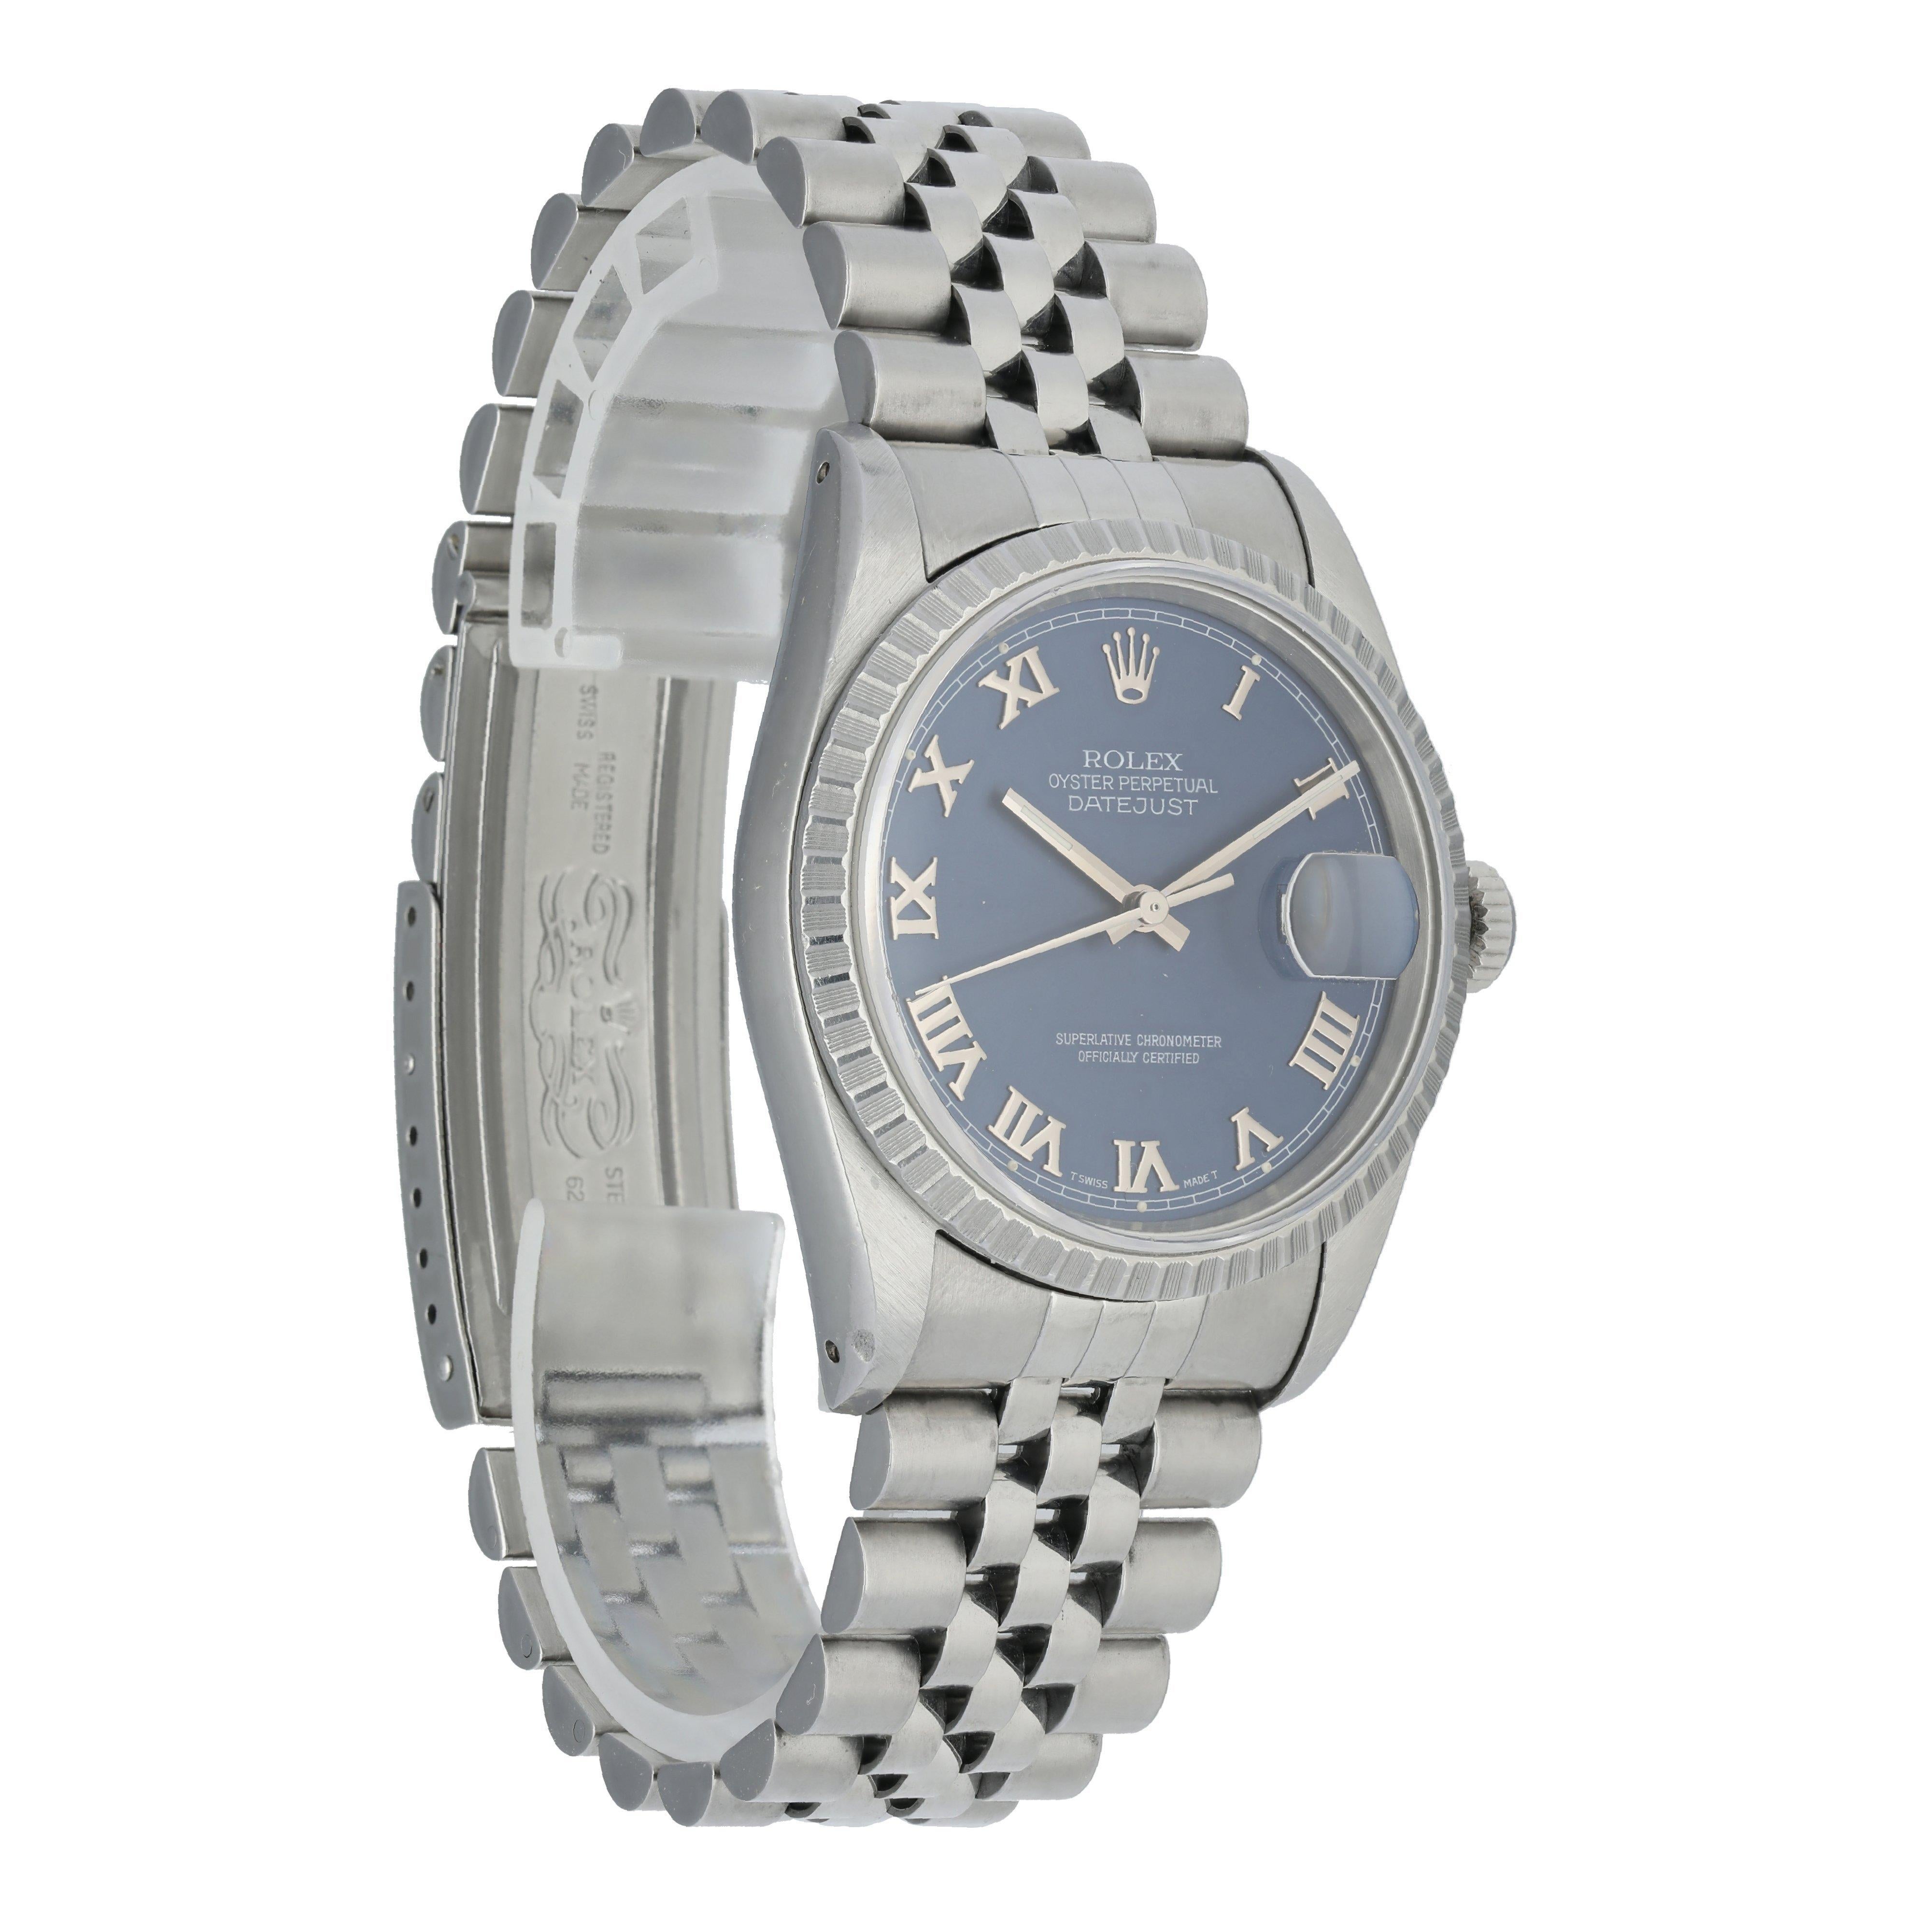 Rolex Datejust 16220 Men's Watch In Excellent Condition For Sale In New York, NY